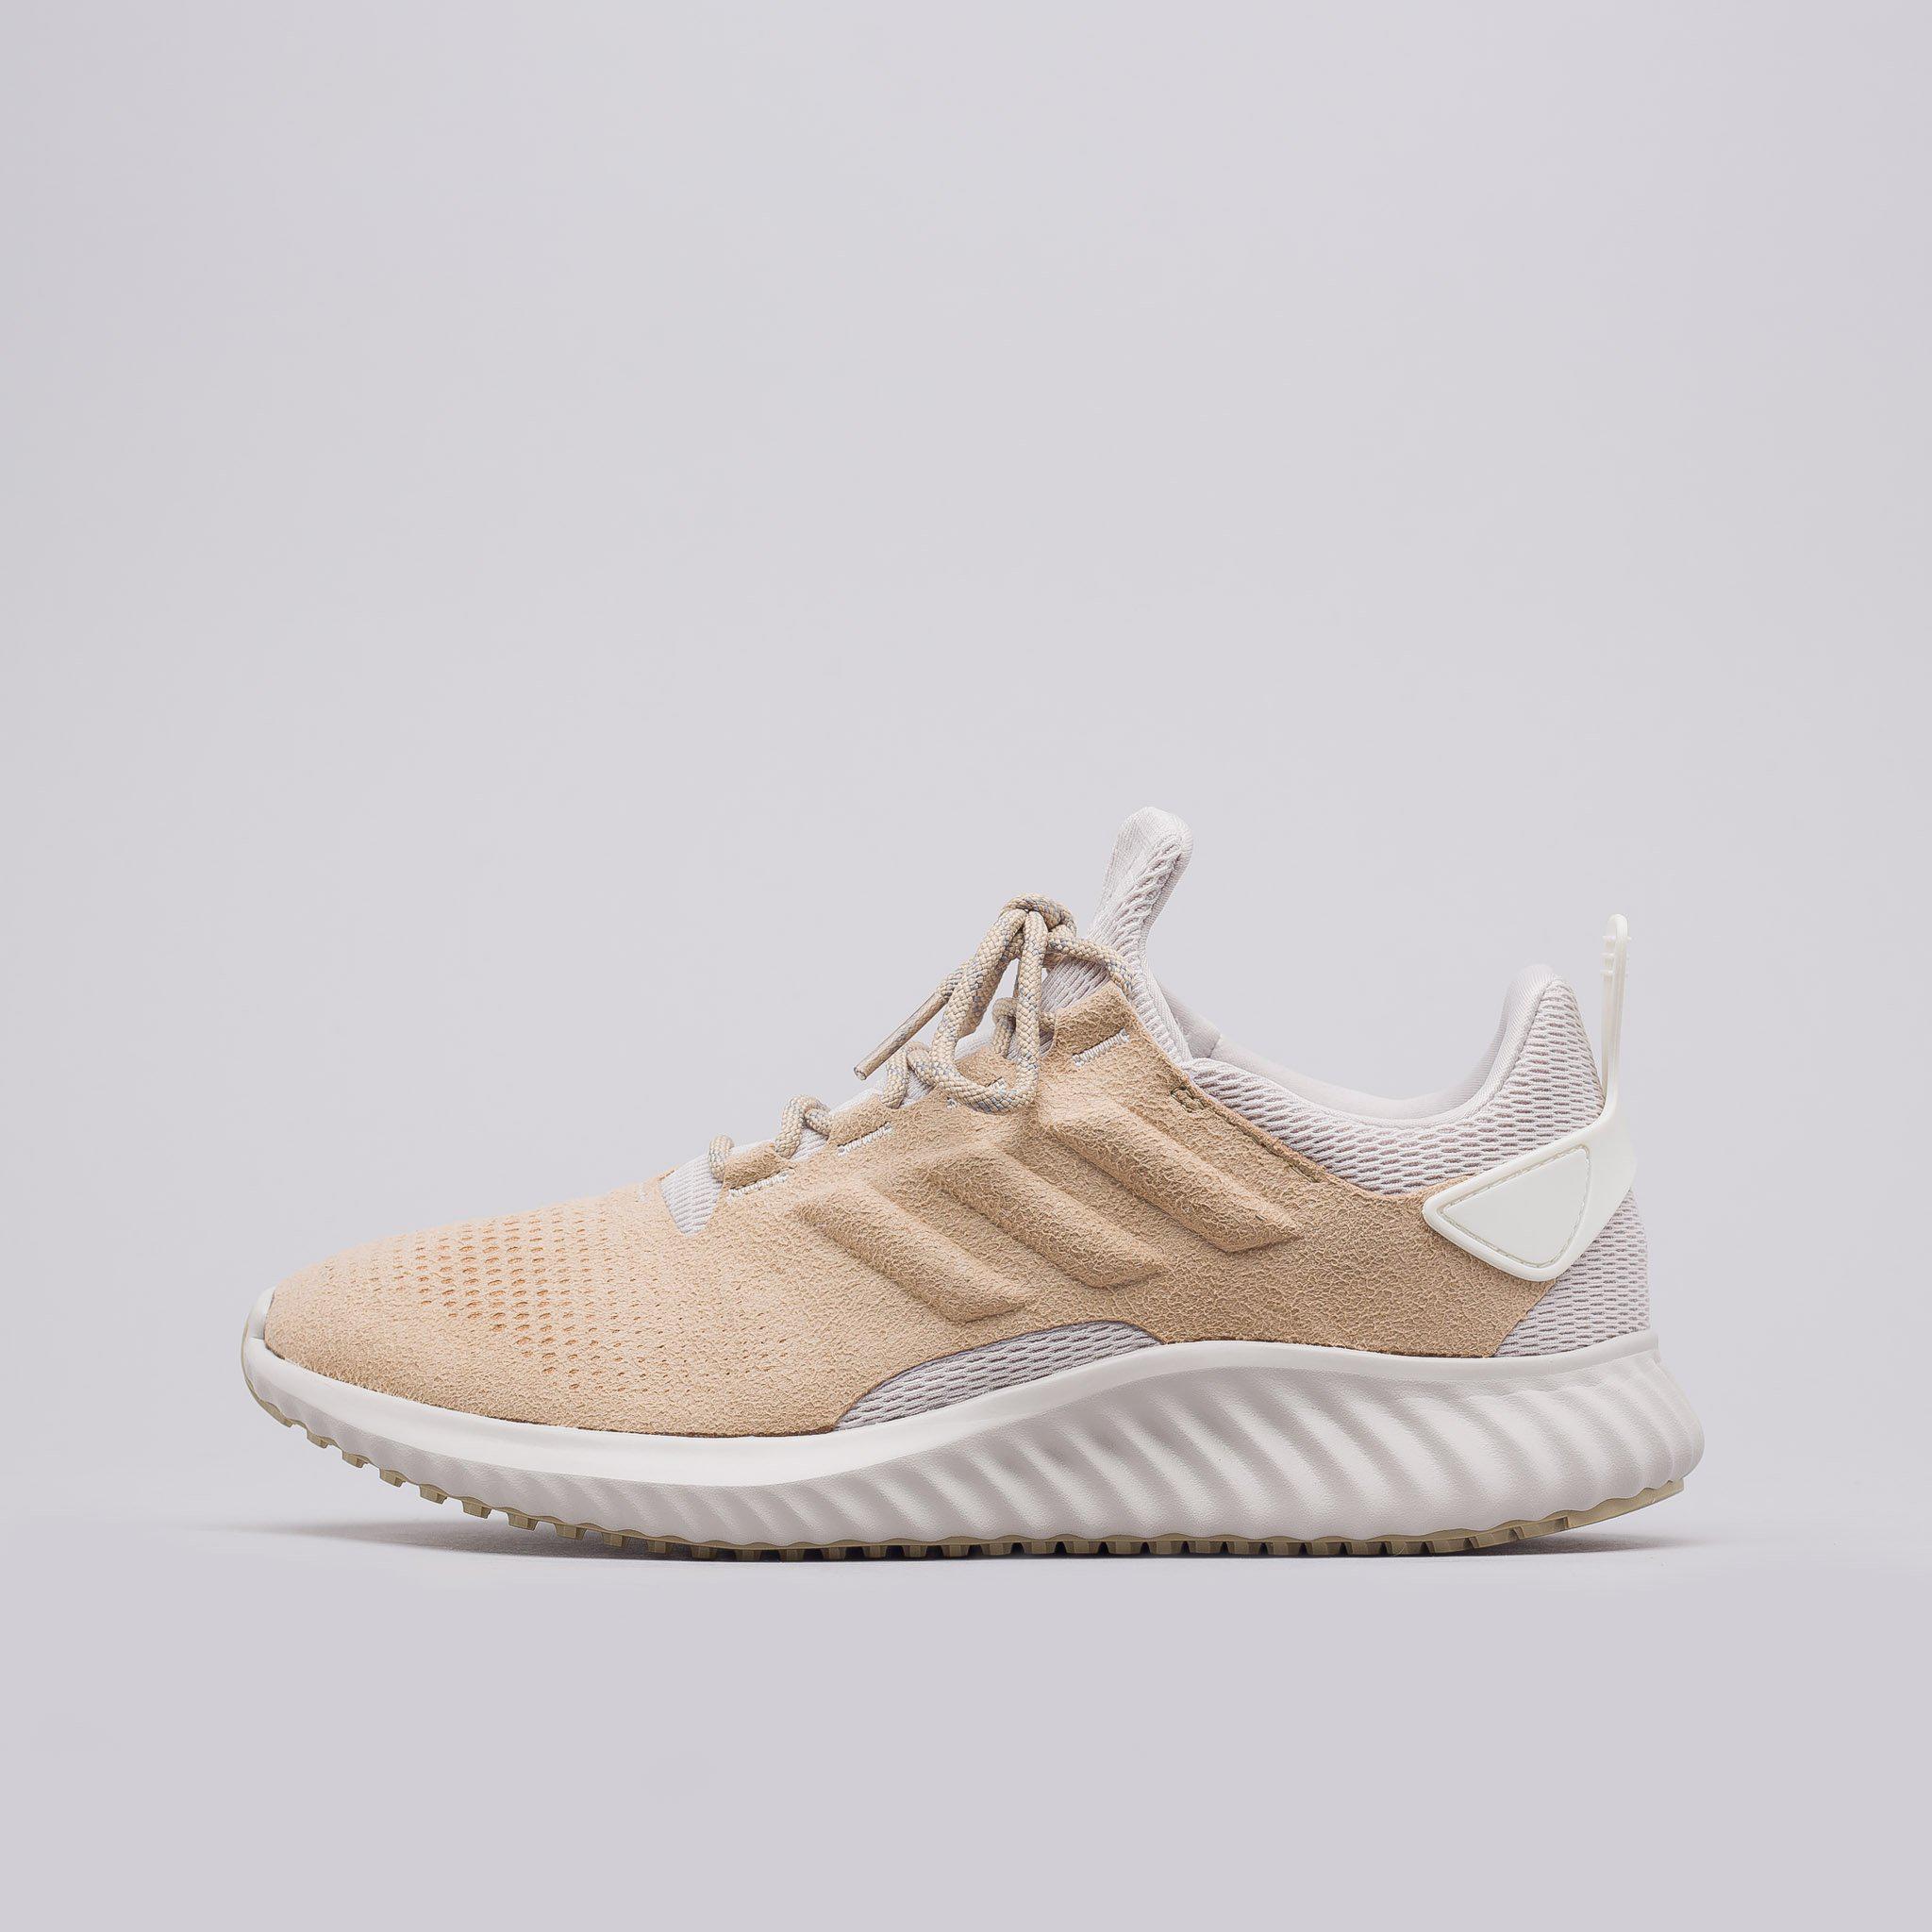 adidas alphabounce city shoes women's